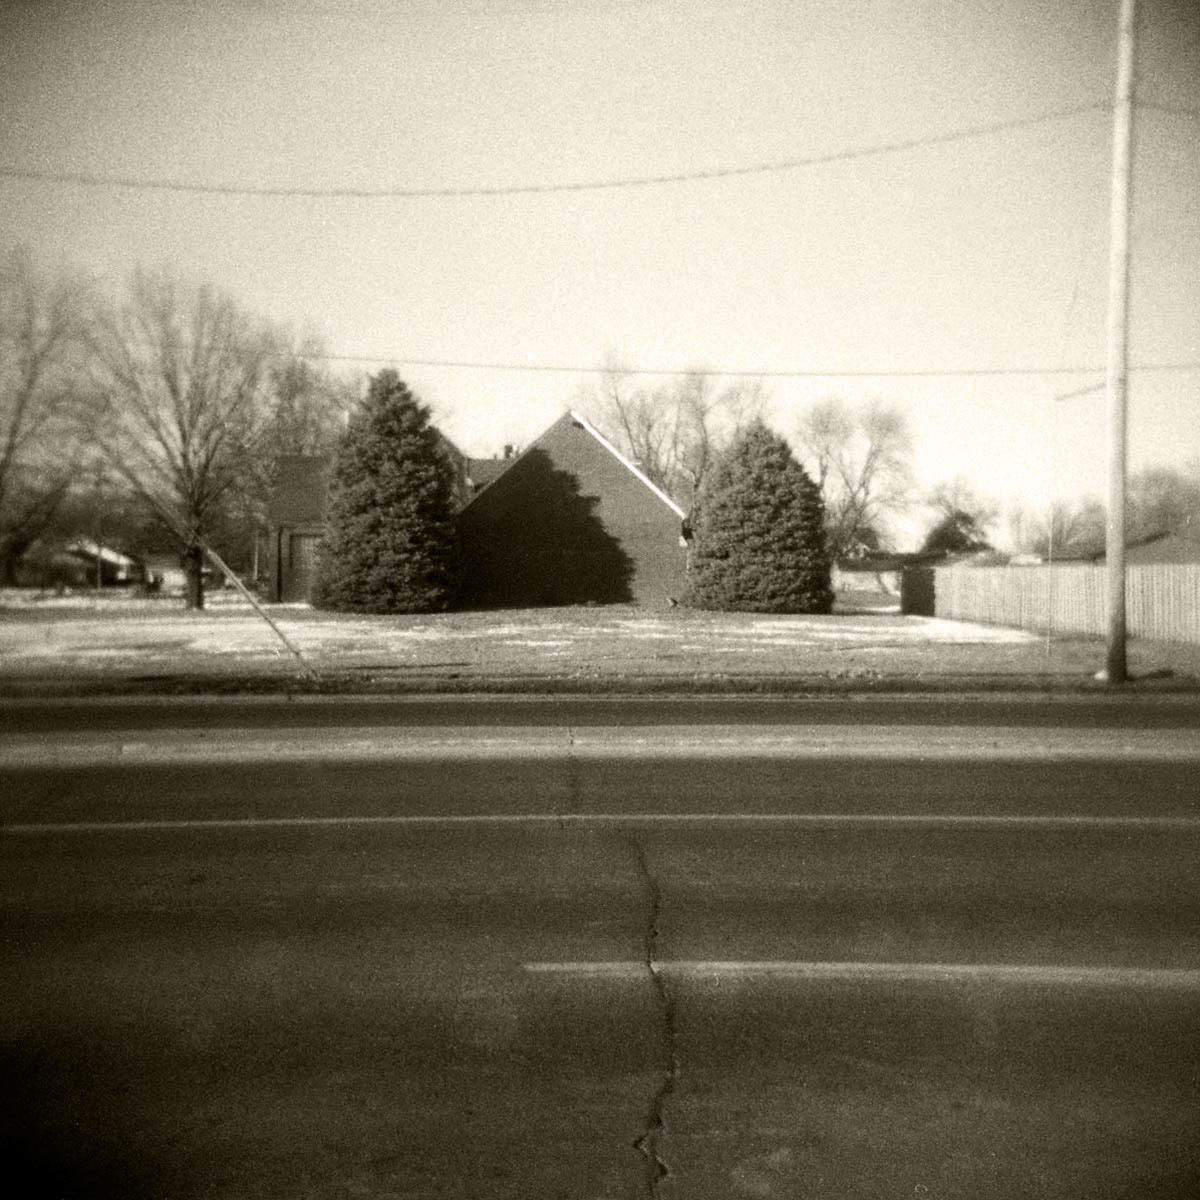 des moines black and white Limitations holga Billboards Signage Frosty Freeze found beauty discovery sidewalk exploration